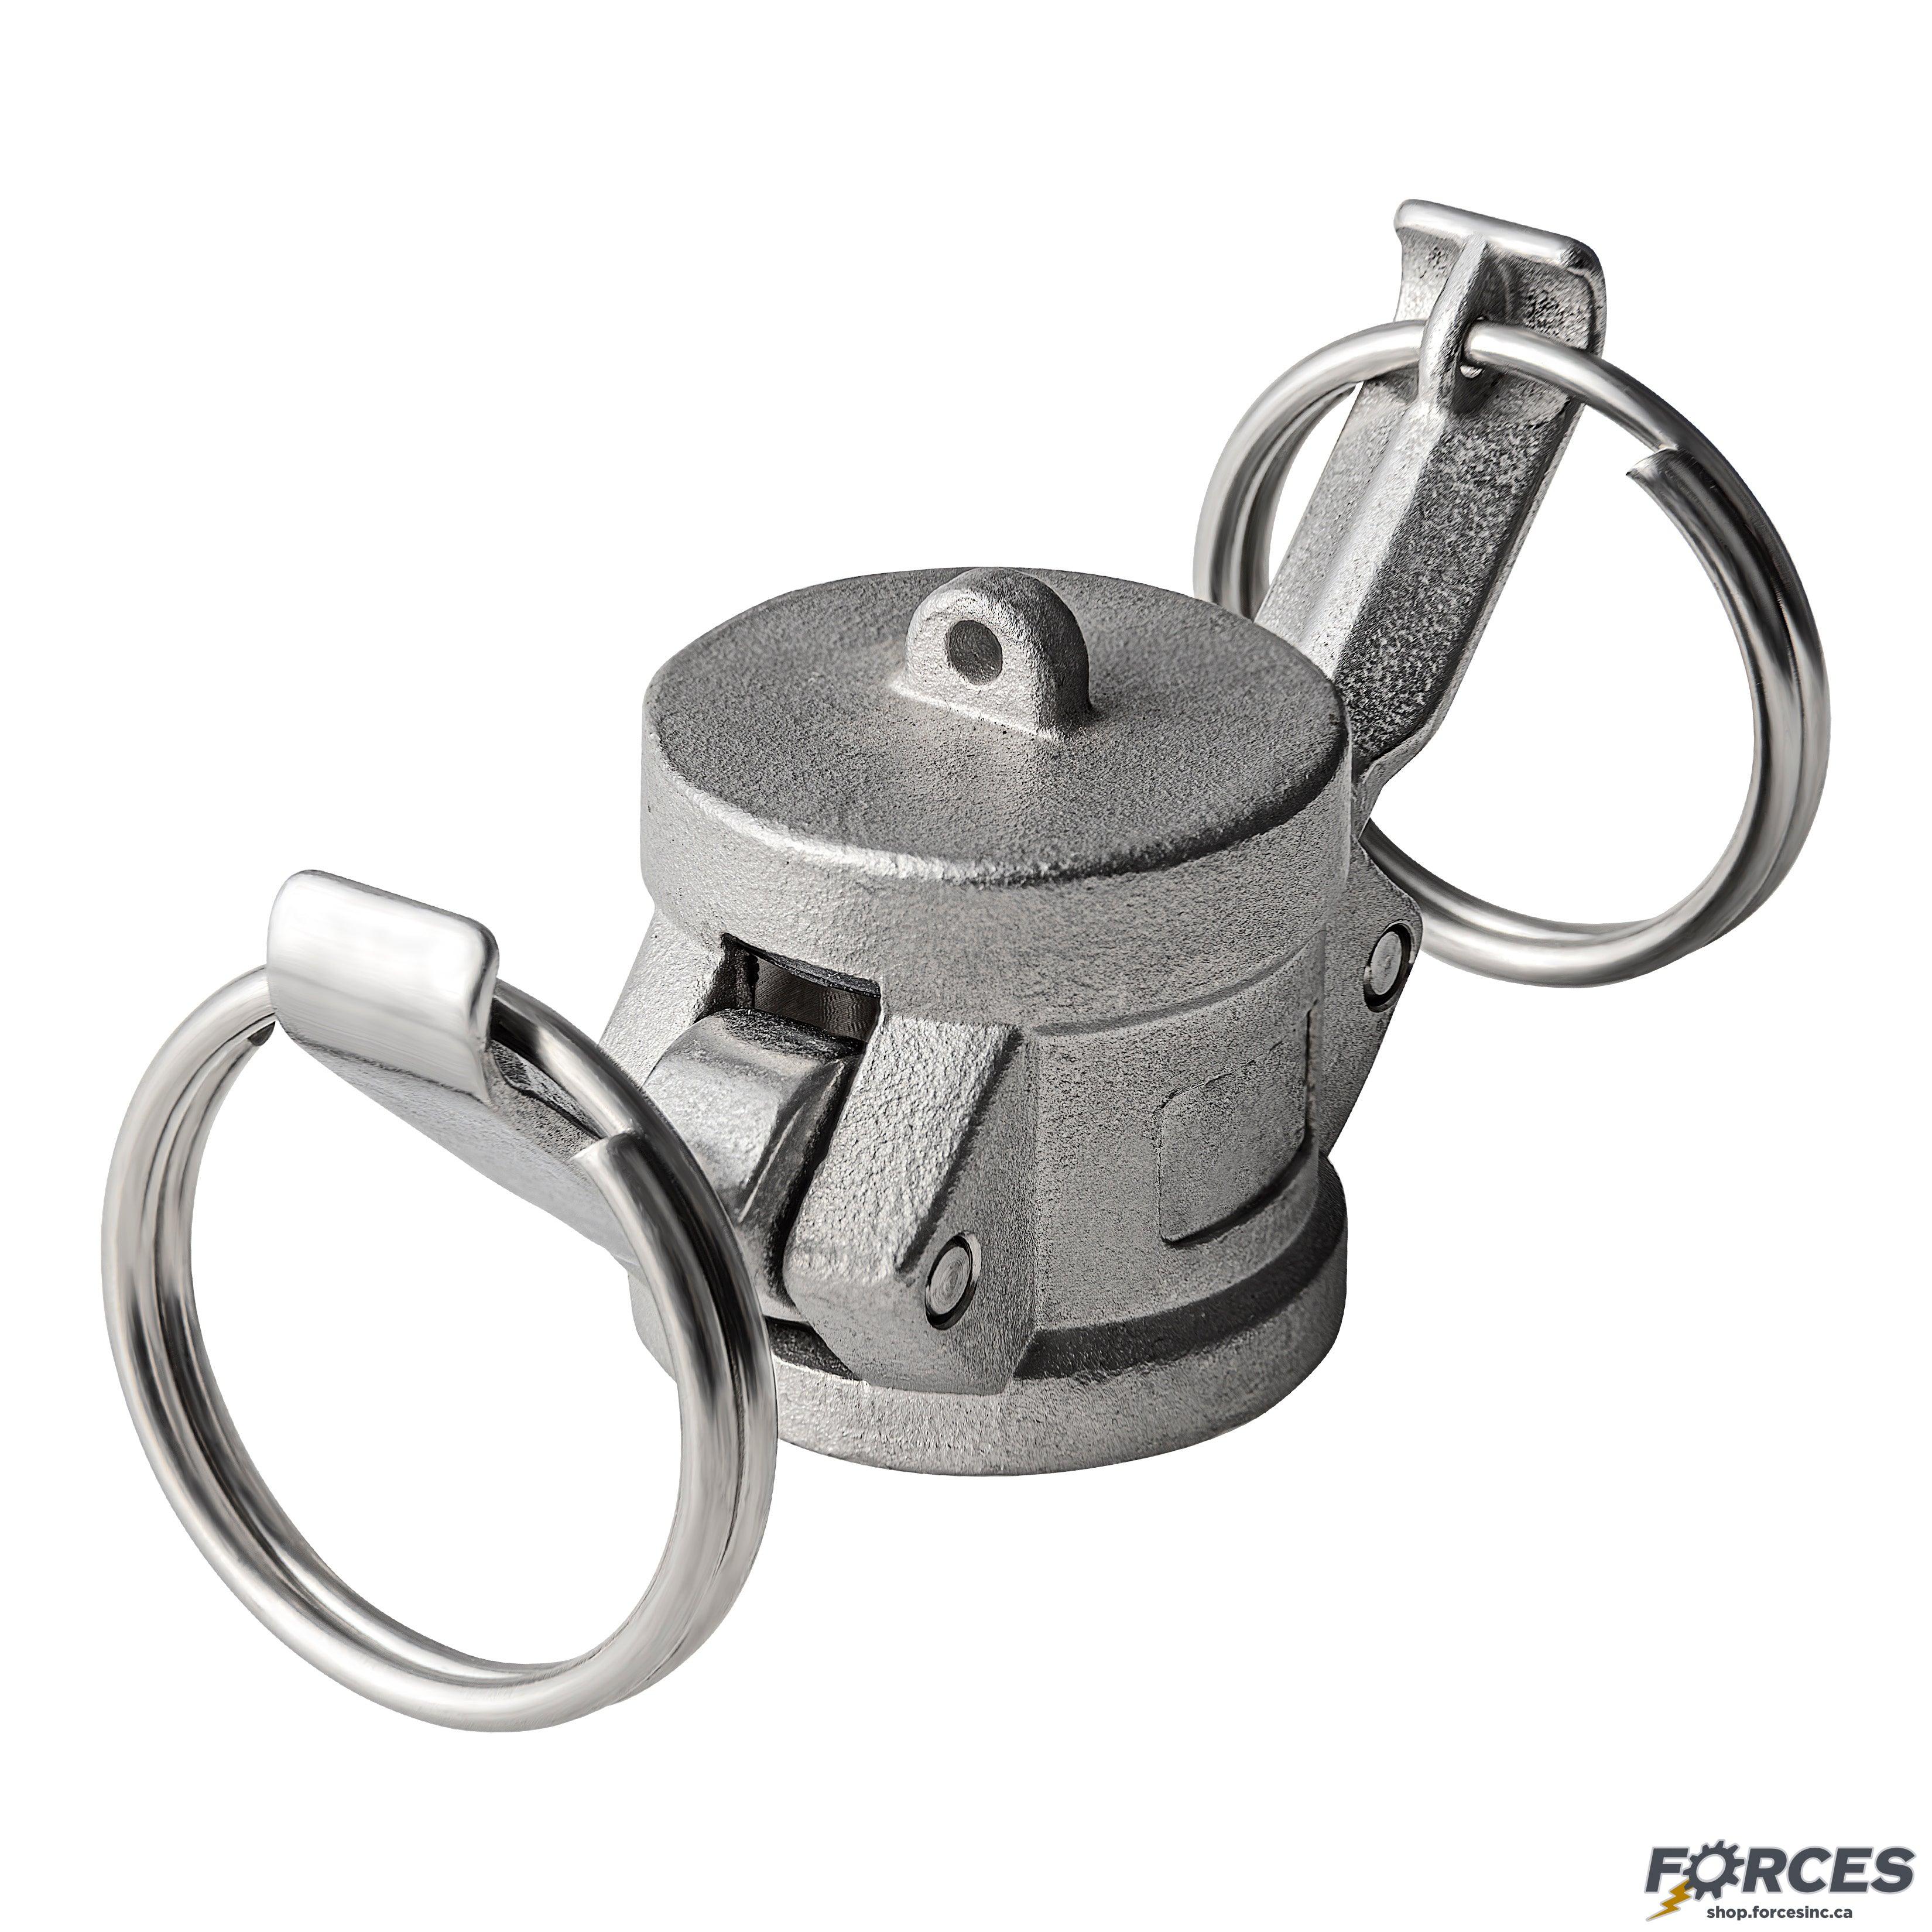 1-1/2" Type DC Camlock Fitting Stainless Steel 316 - Forces Inc